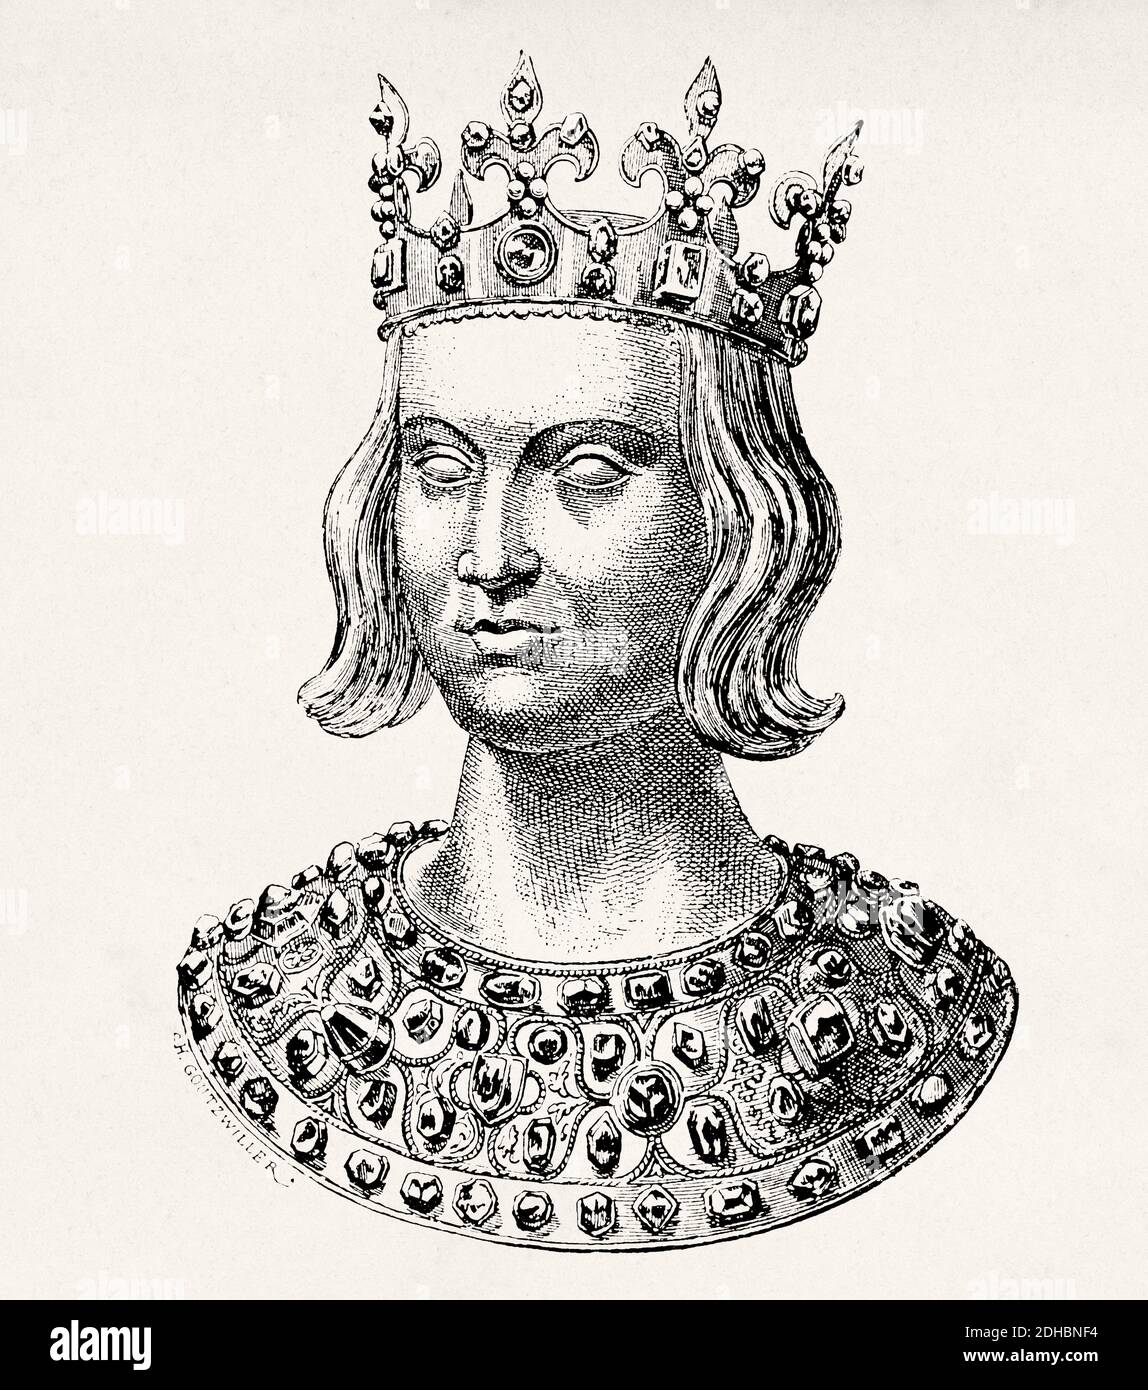 Portrait of Louis IX the Saint (1215-1270). King of France from 1226 to 1270. House of Capet, Direct Capetians or House of France. Old XIX century engraving illustration. Les Français Illustres by Gustave Demoulin 1897 Stock Photo